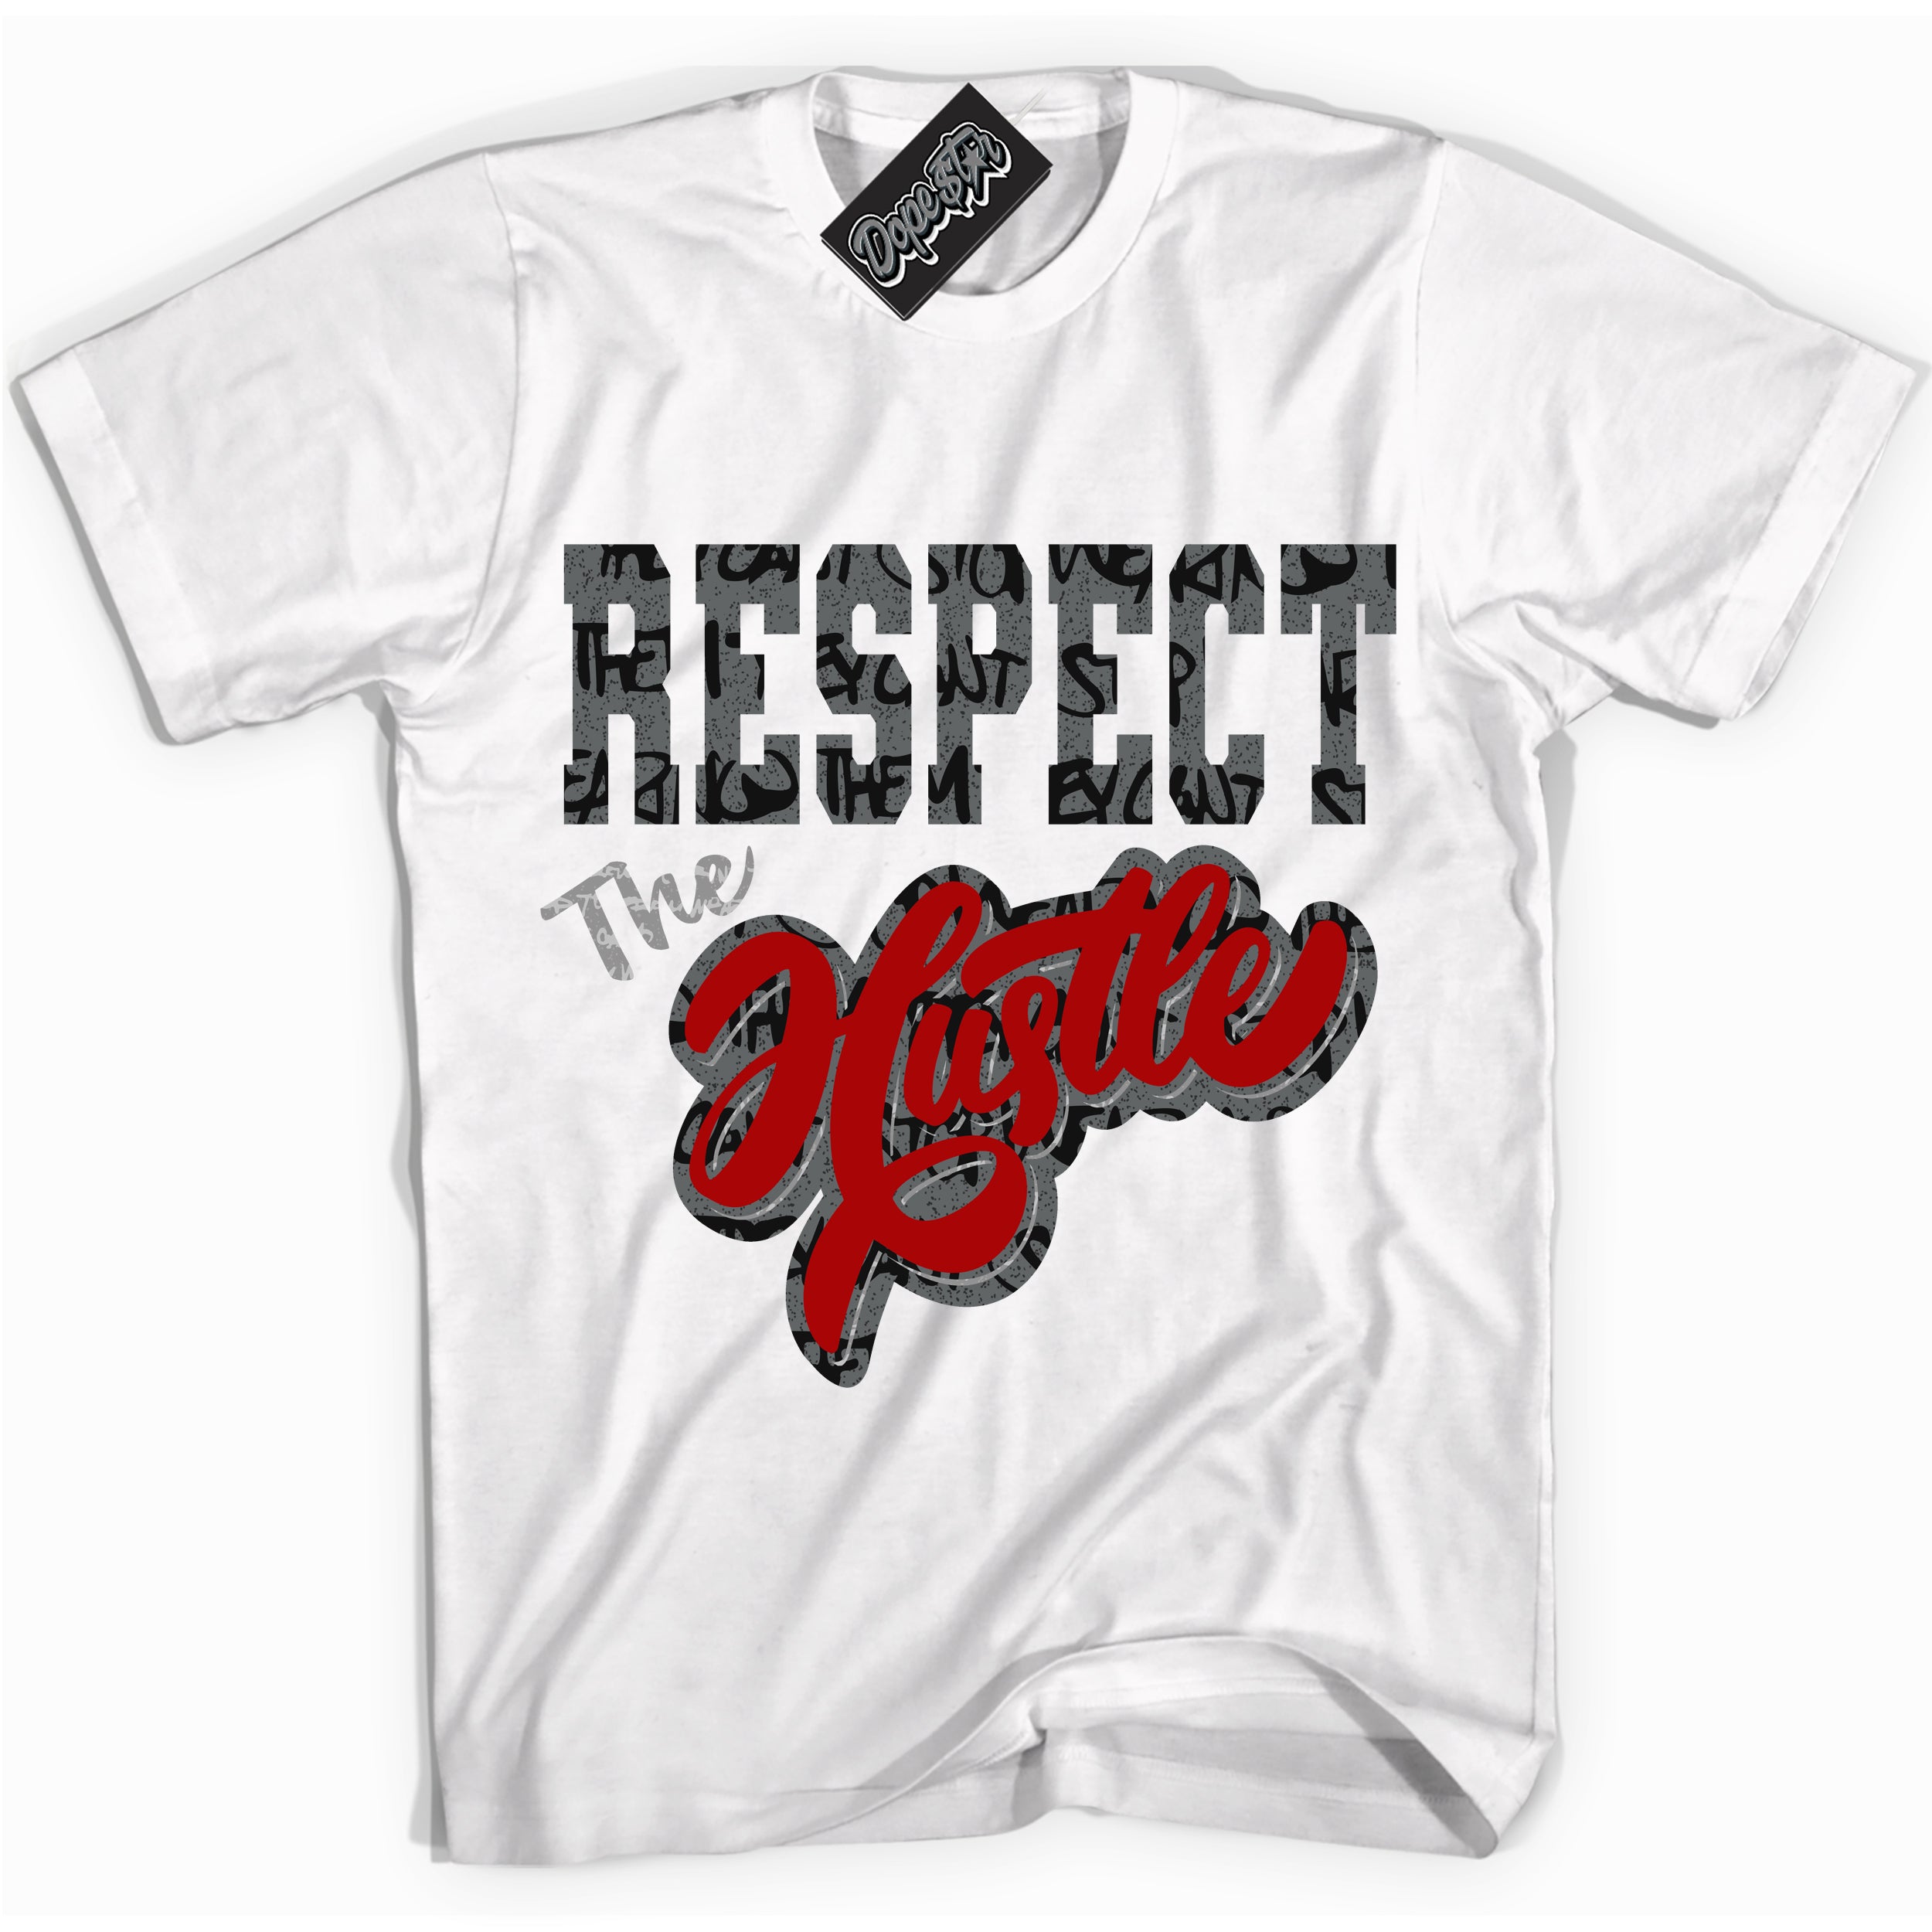 Cool White Shirt with “ Respect The Hustle ” design that perfectly matches Rebellionaire 1s Sneakers.